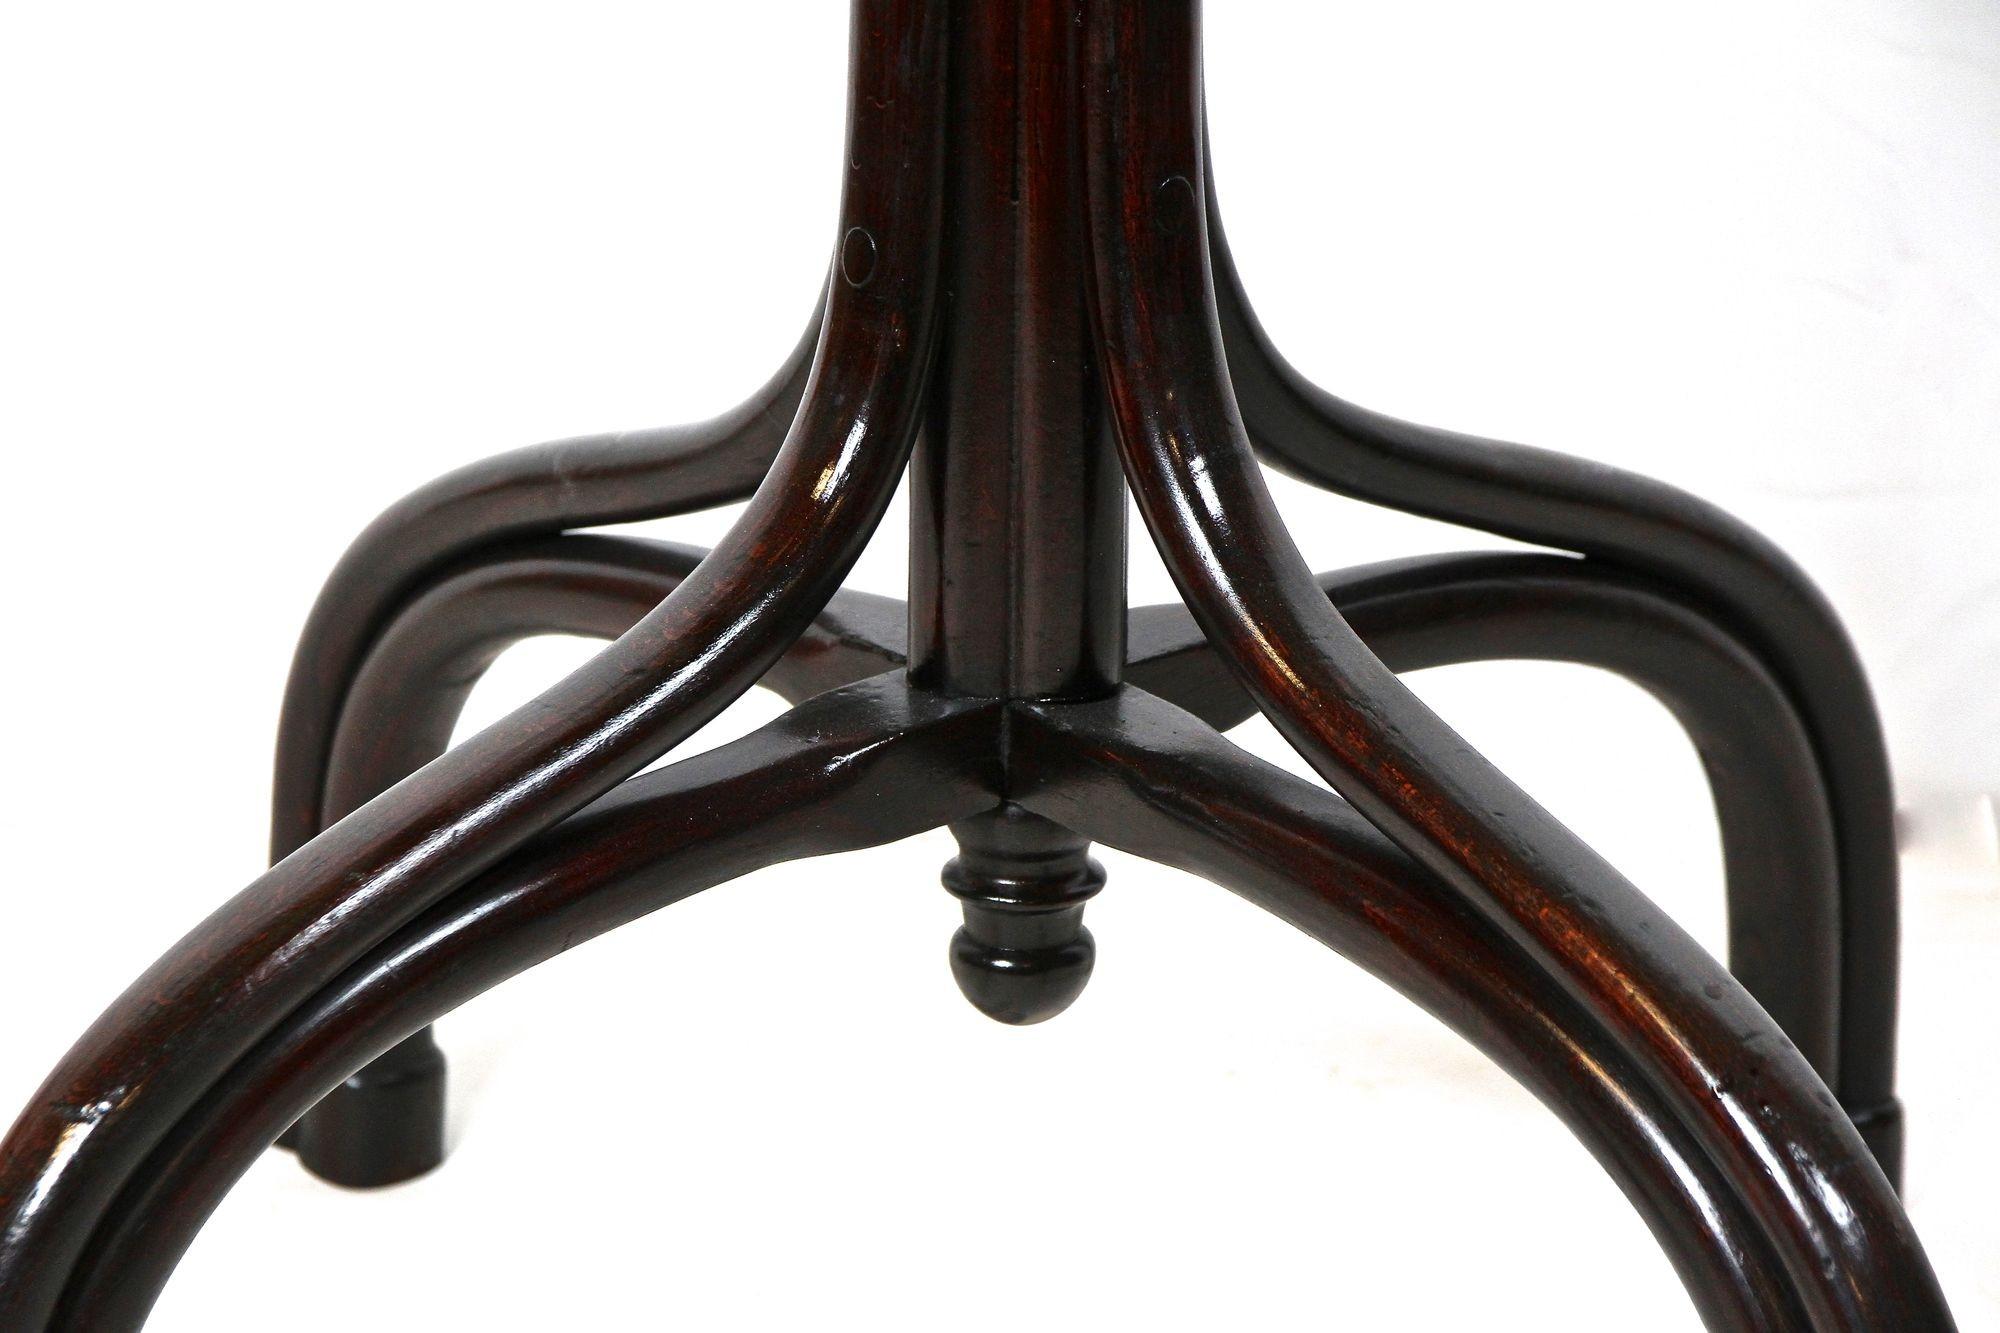 Thonet Coat Rack/ Wardrobe Stand Bentwood Polished, Art Nouveau, AT ca. 1905 For Sale 11